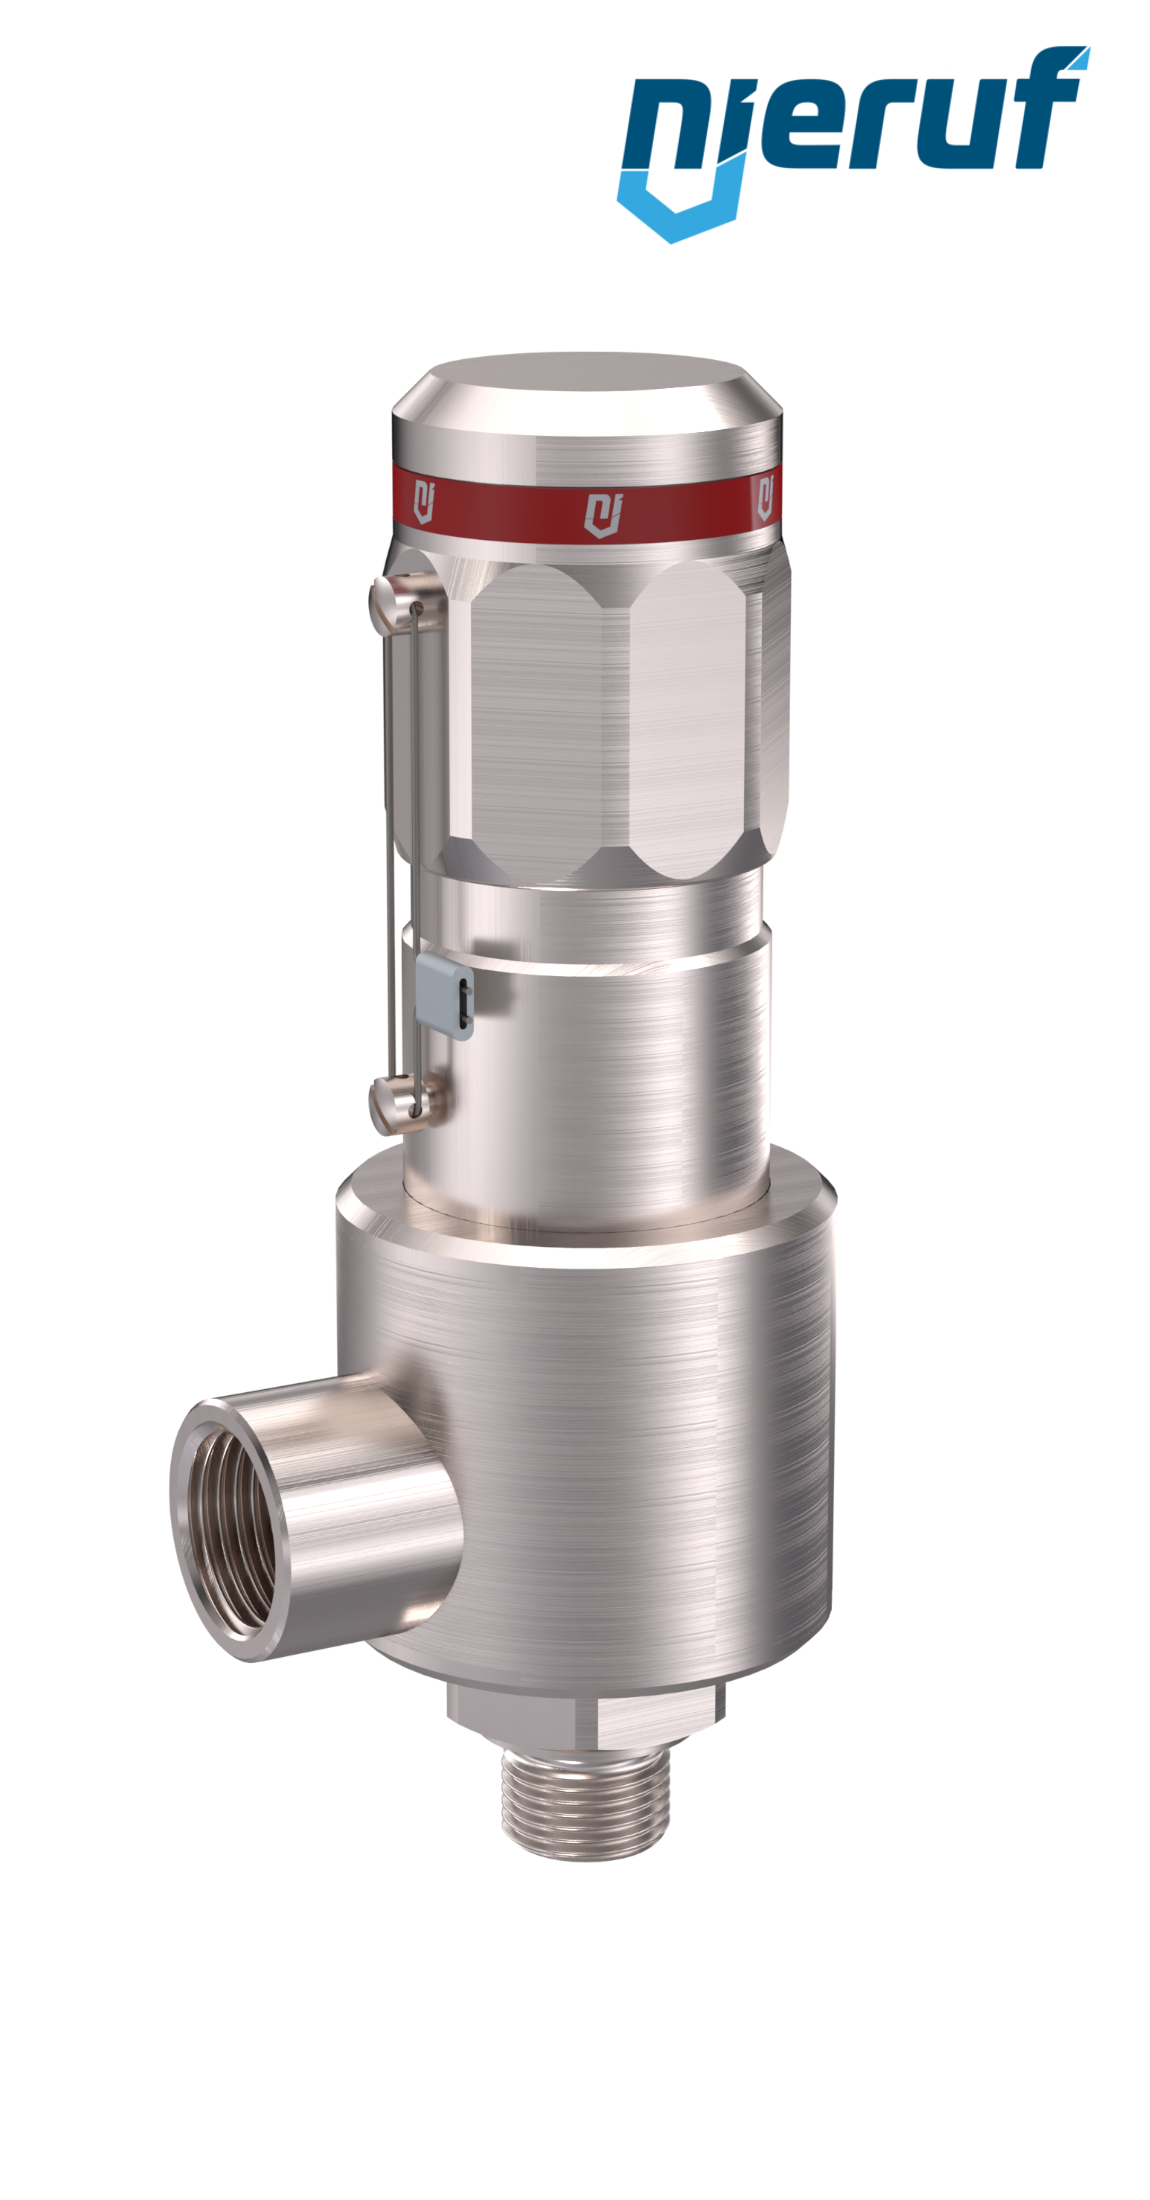 safety-valve DN10 1/4" m x 1" fm male thread NPT, SV15, MD / PAI, without lifting device, angle-type, 50,0 - 180,0 bar